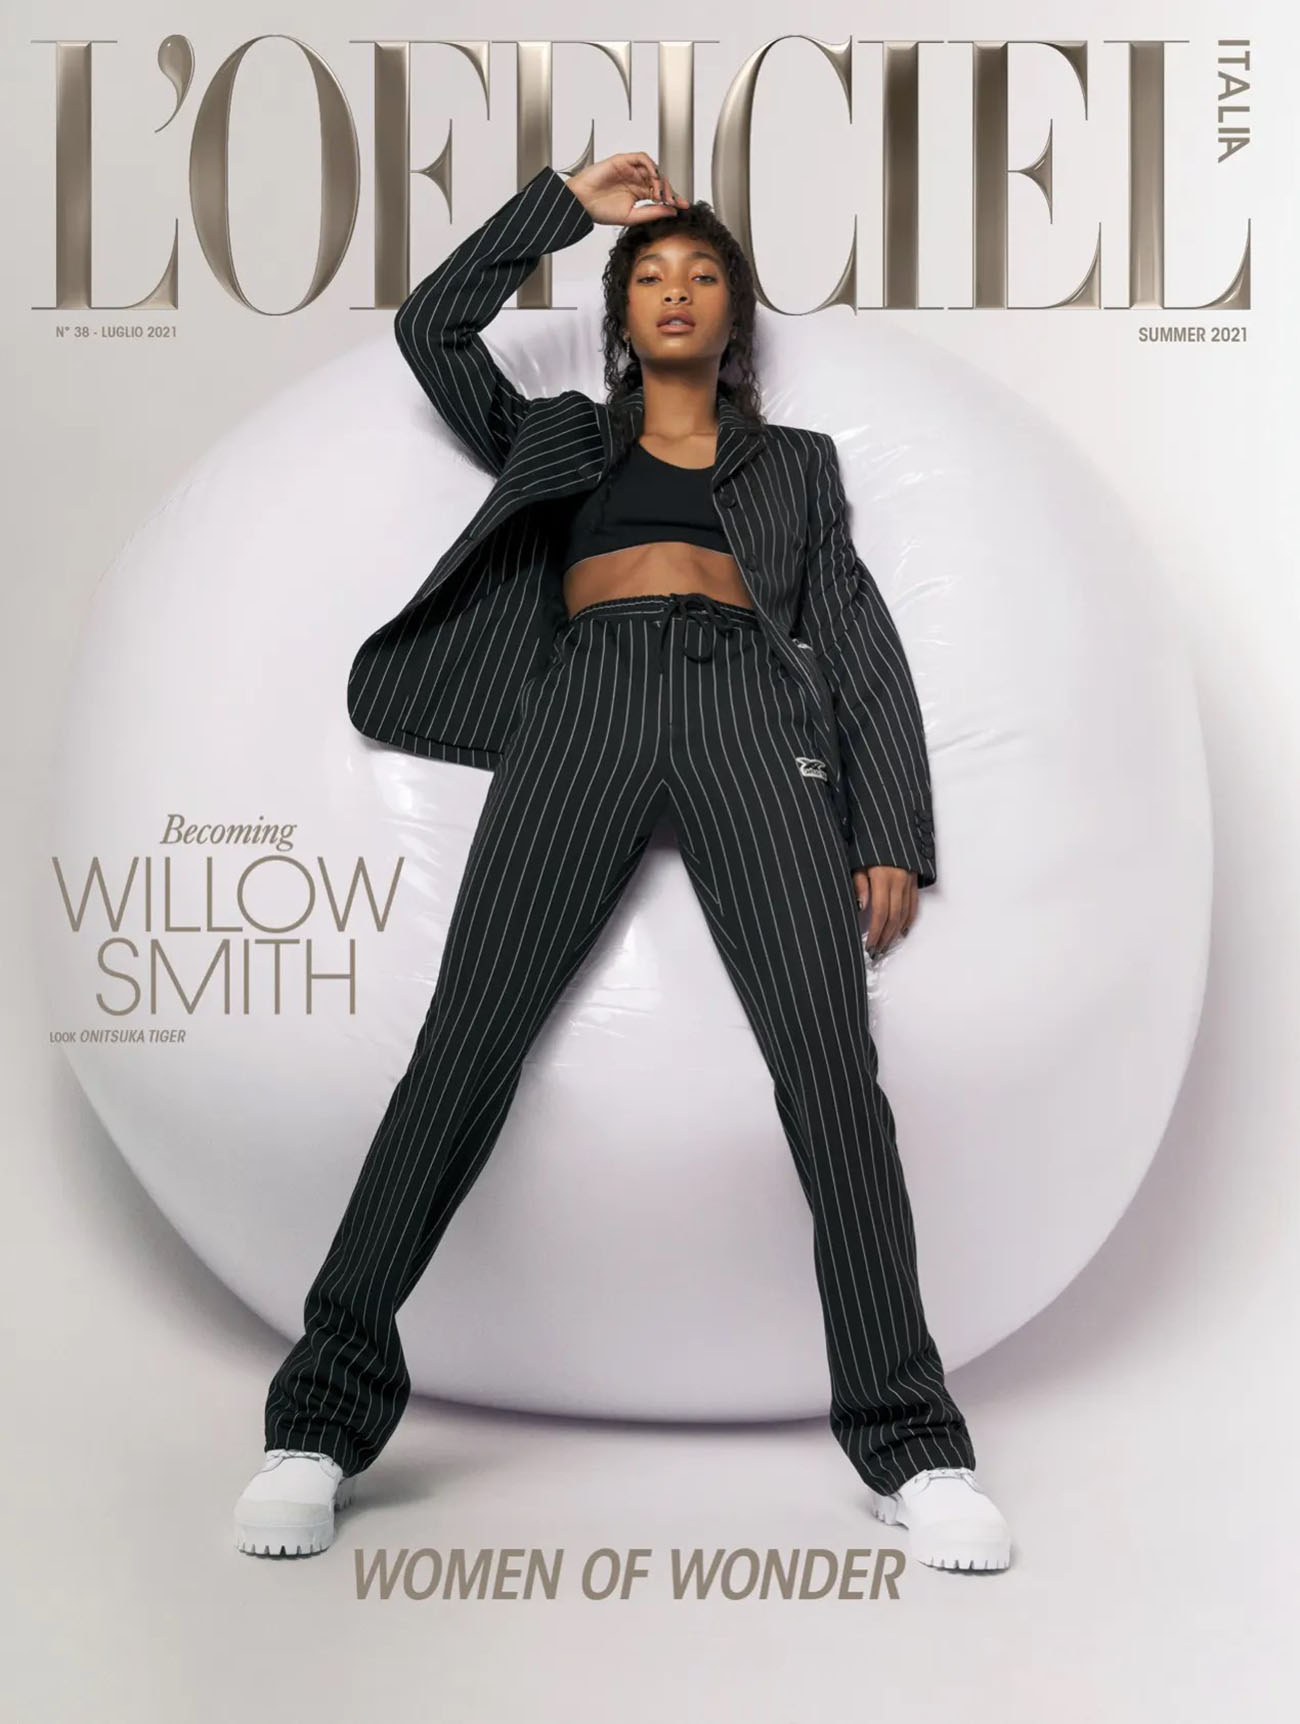 Willow Smith covers L’Officiel USA July 2021 and L’Officiel Italia Issue 38 by Myles Loftin